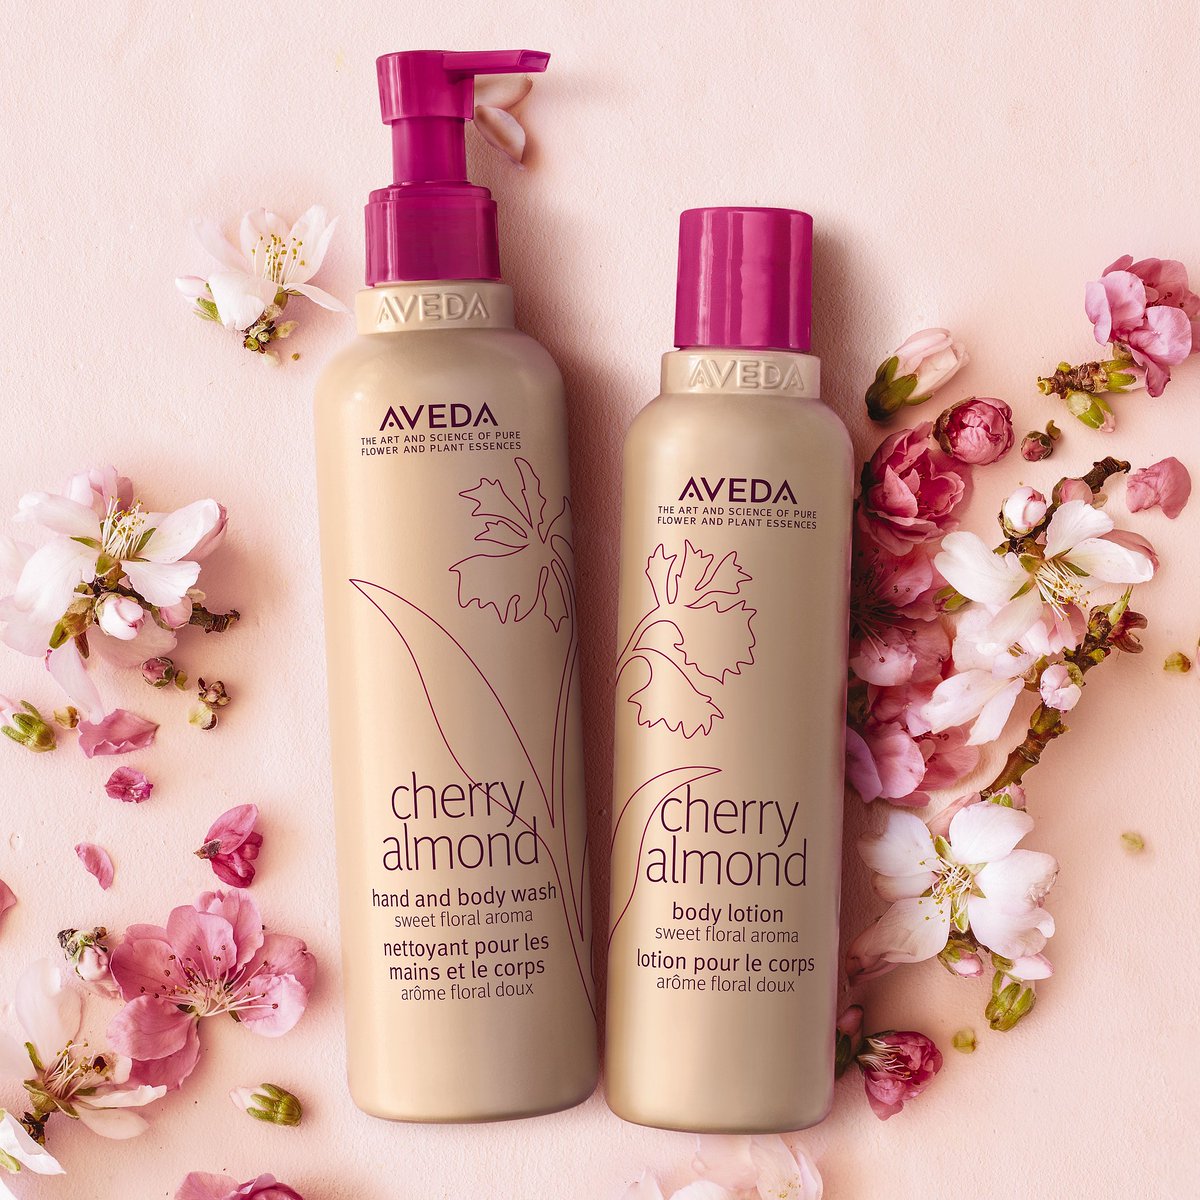 Feel sweet and soft from head to toe with NEW #CherryAlmond Body Lotion and Hand & Body Wash! #SmellsLikeAveda
#beautybyutopia